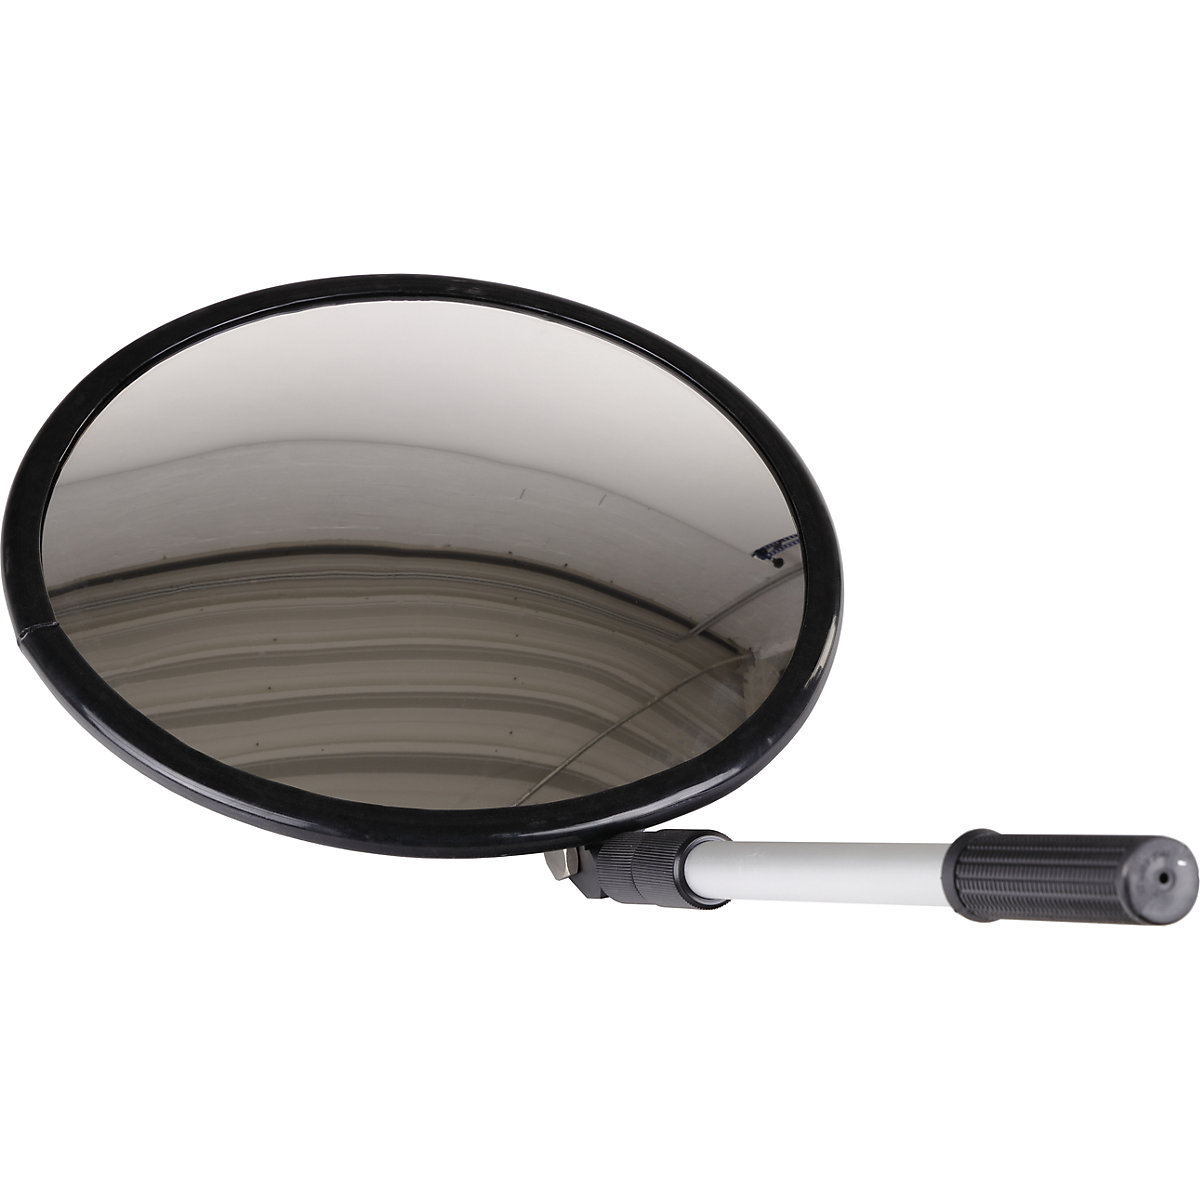 Inspection mirror with telescopic arm